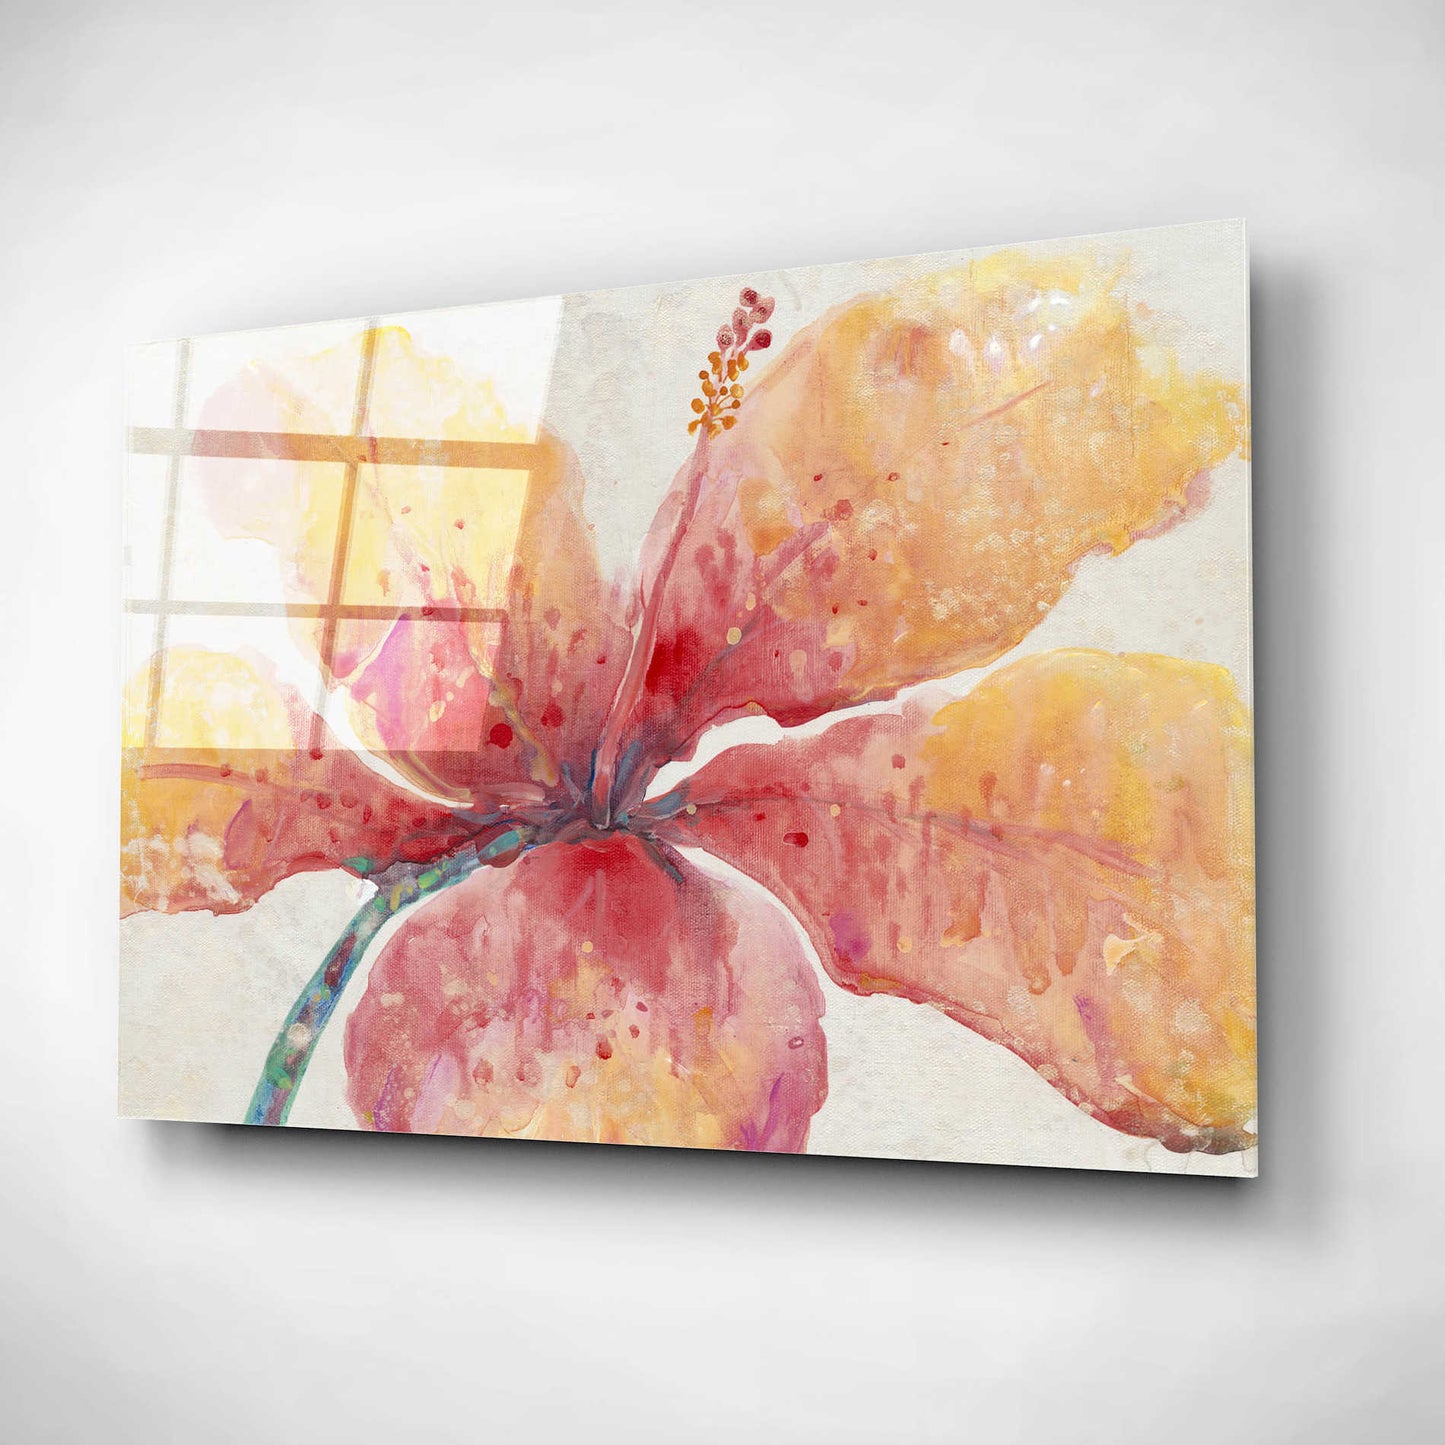 Epic Art 'Blooming Hibiscus' by Tim O'Toole, Acrylic Glass Wall Art,16x12